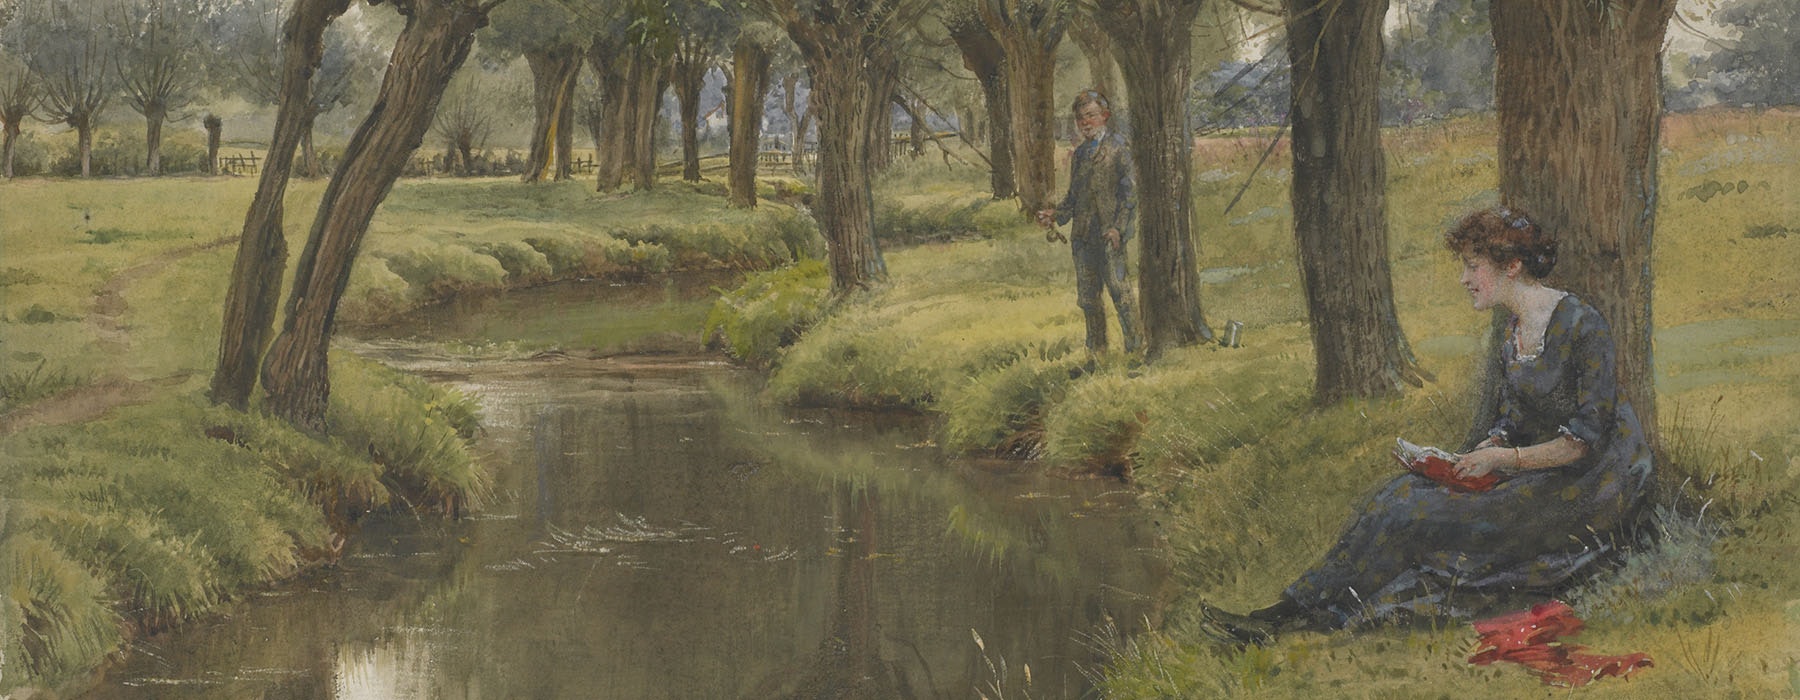 Painting of a countryside river scene. A woman sits under a tree reading a book, while a man behind her fishes